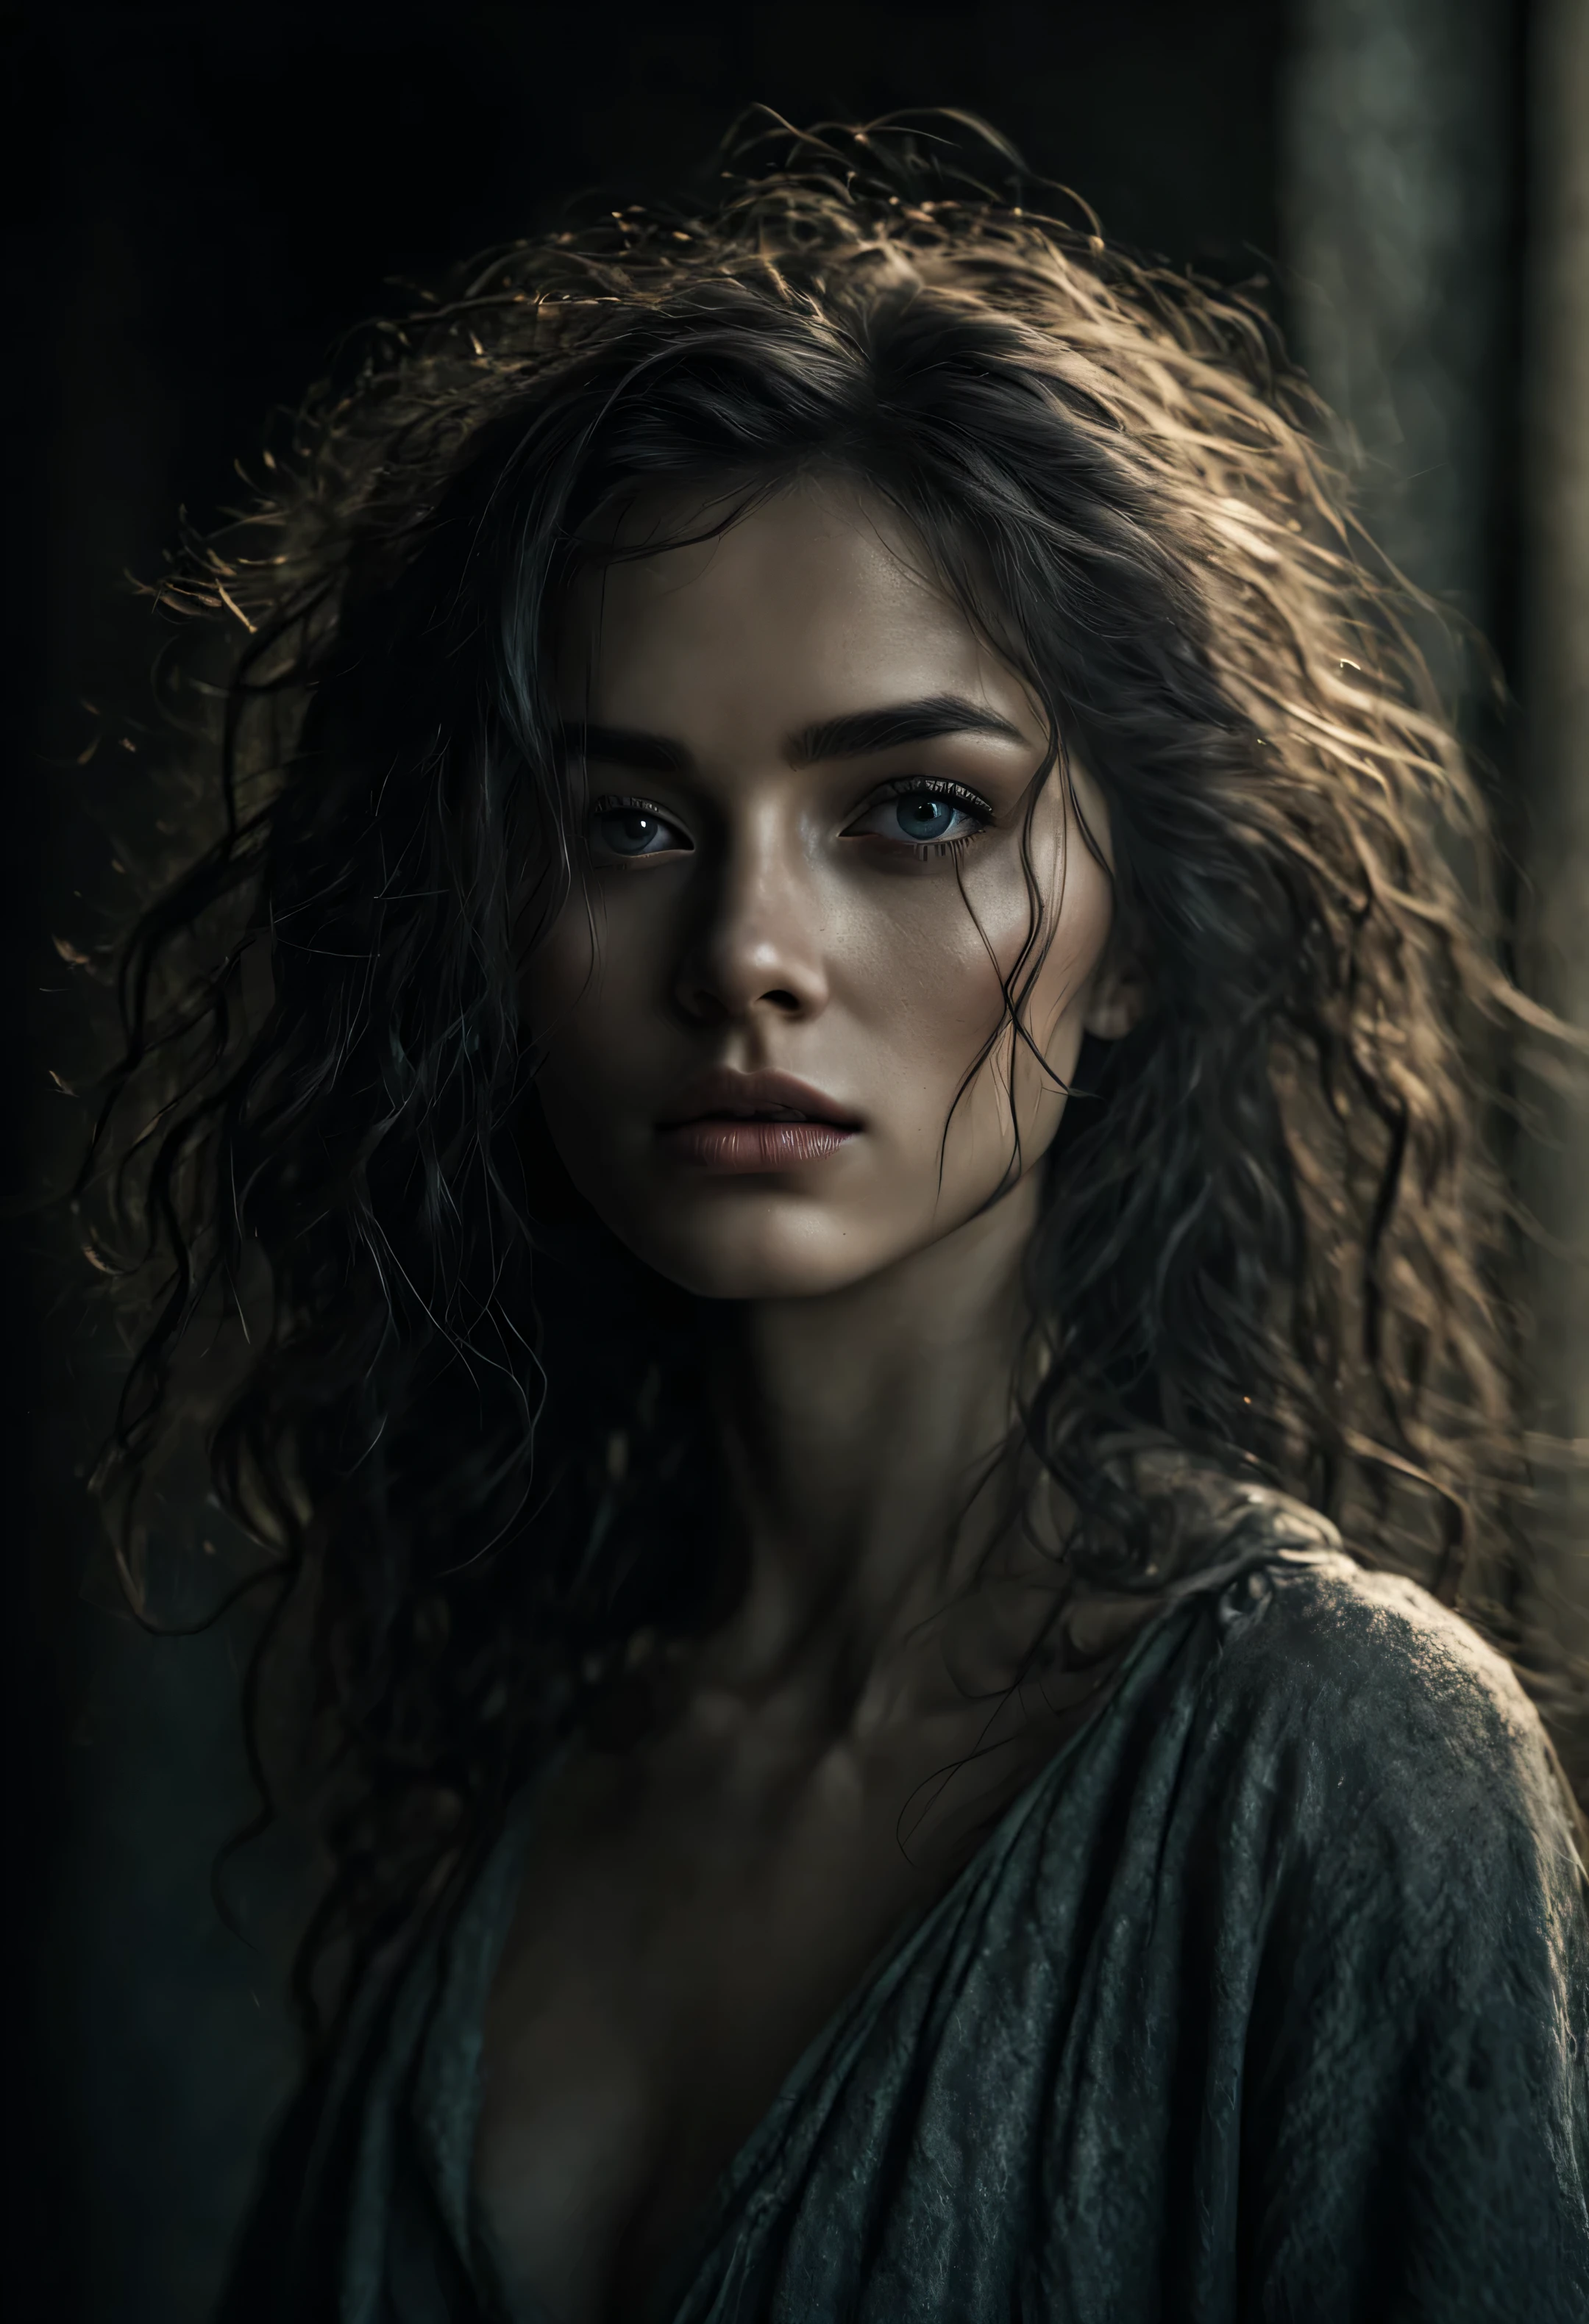 the most beautiful girl on the planet,collective ethnicity of different races (25% Noir +25% Arabs +25% Europeans +25% Asians ) , 16yo , long flowing hair against the background of a rock above the ocean ,8k render, photo realism, many details, Well developed facial skin, High-definition image, in a rusty decayed city under a blanket of broken dust, deep shadows, high quality, high resolution, cinematic, dark, vapor, abandoned, conceptual hyper-aesthetic dramatic ambience. Her curly hair frames her face, drawing attention to her striking gray eyes. Her pale skin, with its intricate texture, adds depth and character to her aesthetic. As she savors the moment, she radiates a quiet confidence and contentment. 16k, extreme detail, fine textures, ((dark shadows)), dark, sharp lines, ((time the revelatory)), vivid colors. beautiful. revealing.  masterpiece.  vibrant.  (back lighting).  (void:1.2). (perspective:1.3).  (wind:1.1).  (tang:1.1). (time:1.4). (decay:1.3). (fog:1.1). (ruin:1.1) Shot on a Hasselblad high format camera with a 100mm lens, this portrait is a stunning example of visual storytelling, this cinematic image captures the model's effortless beauty and the grandeur of the city below. (35mm, F/2.8) Photo Focus, DOF, Aperture, and hyper-maximalist rendering bring this scene to life in stunning detail. This image captures every nuance of her expression, from the subtle creases in her skin to the way her hair falls around her face. It's a stunningly realistic and visually descriptive piece. The composition is expertly crafted, with global illumination adding a sense of depth and dimension.